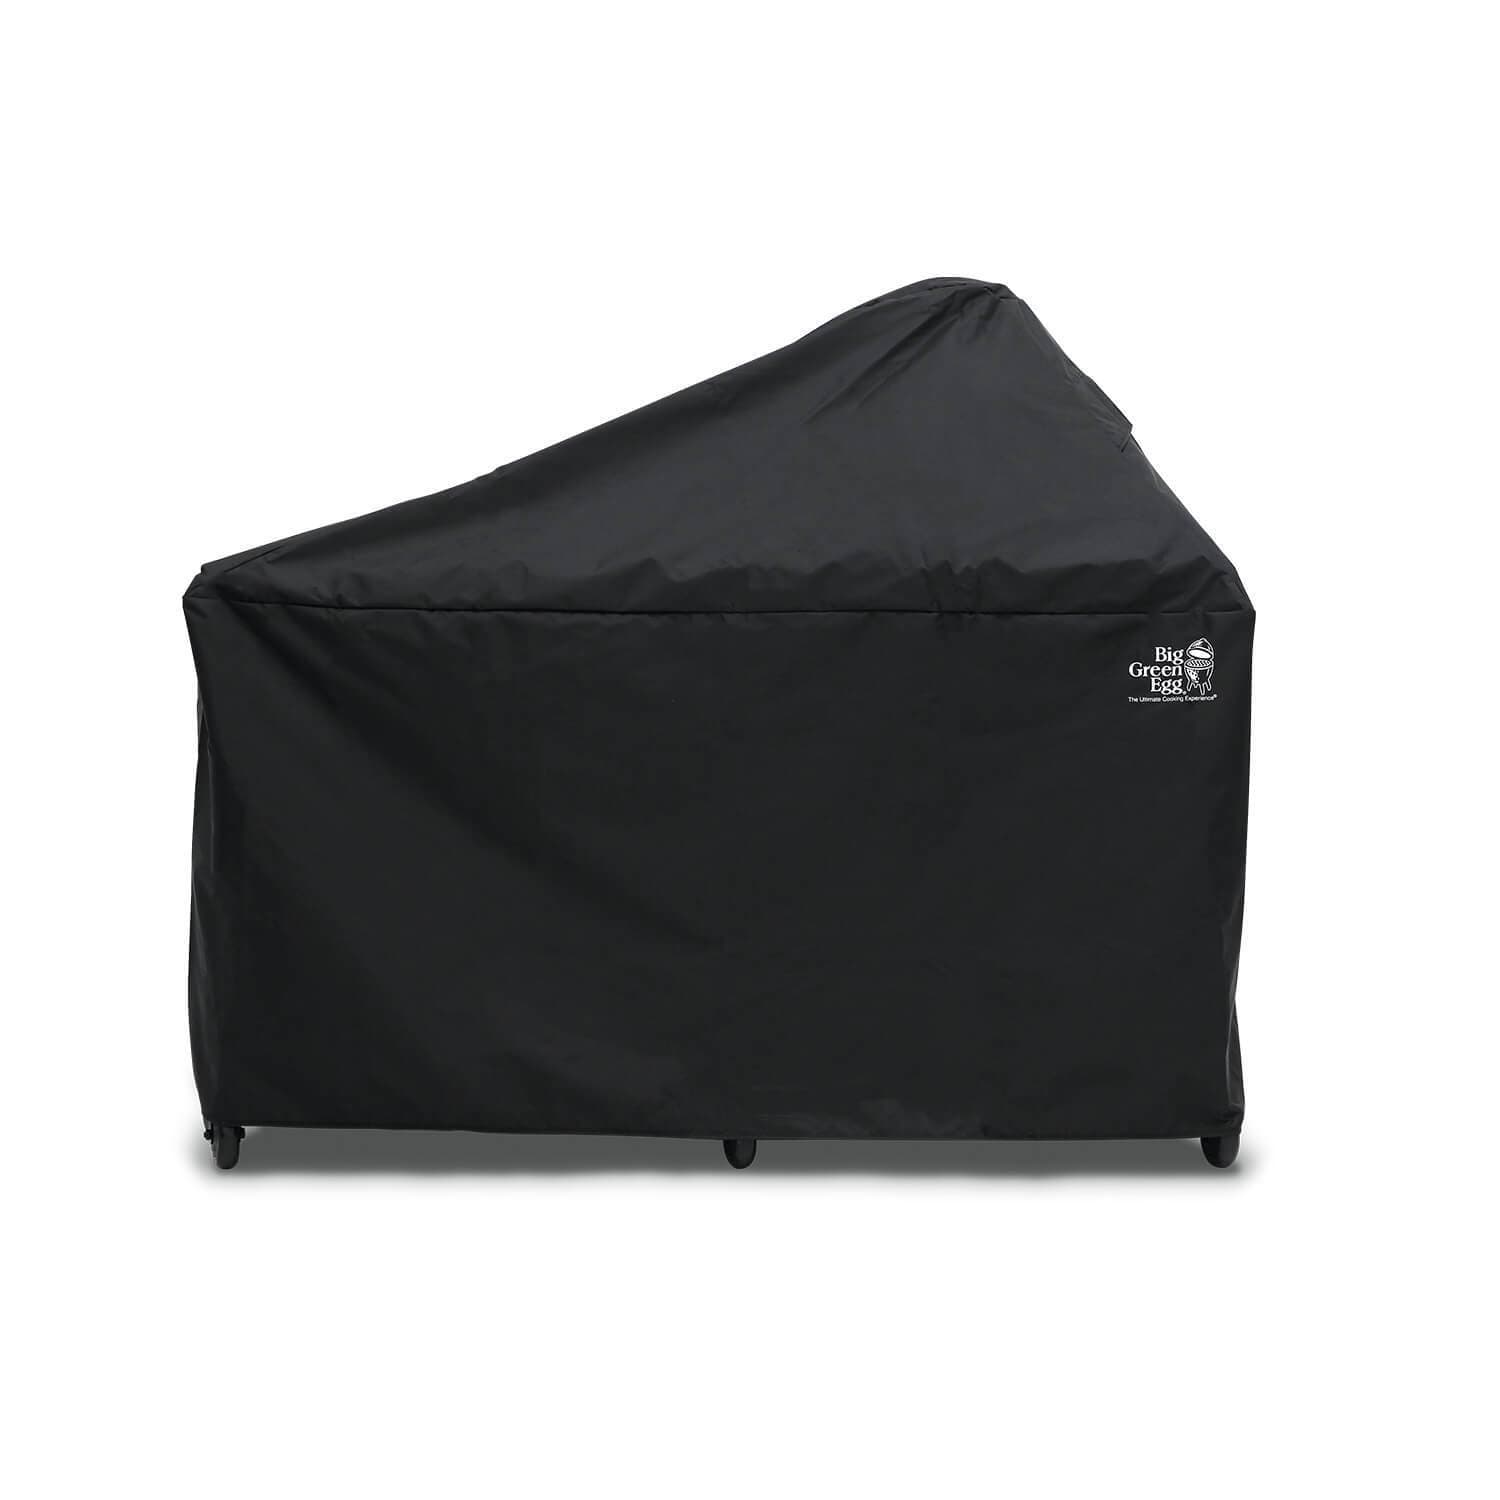 Big Green Egg Barbeque Multi-Fit Cover C